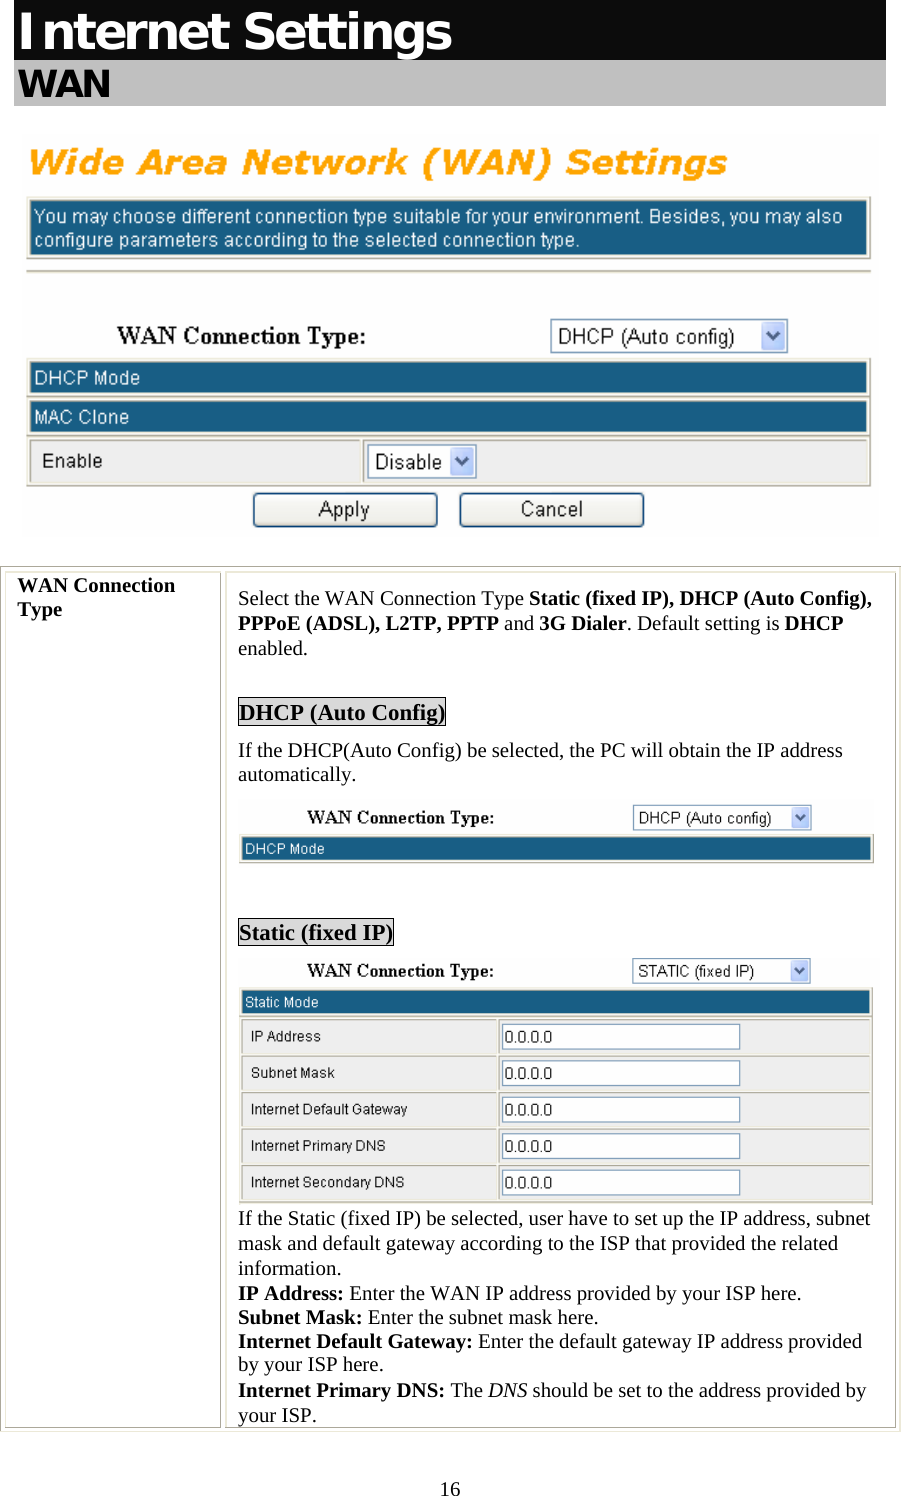   16Internet Settings  WAN  WAN Connection Type  Select the WAN Connection Type Static (fixed IP), DHCP (Auto Config), PPPoE (ADSL), L2TP, PPTP and 3G Dialer. Default setting is DHCP enabled.  DHCP (Auto Config) If the DHCP(Auto Config) be selected, the PC will obtain the IP address automatically.   Static (fixed IP)  If the Static (fixed IP) be selected, user have to set up the IP address, subnet mask and default gateway according to the ISP that provided the related information. IP Address: Enter the WAN IP address provided by your ISP here. Subnet Mask: Enter the subnet mask here. Internet Default Gateway: Enter the default gateway IP address provided by your ISP here. Internet Primary DNS: The DNS should be set to the address provided by your ISP. 